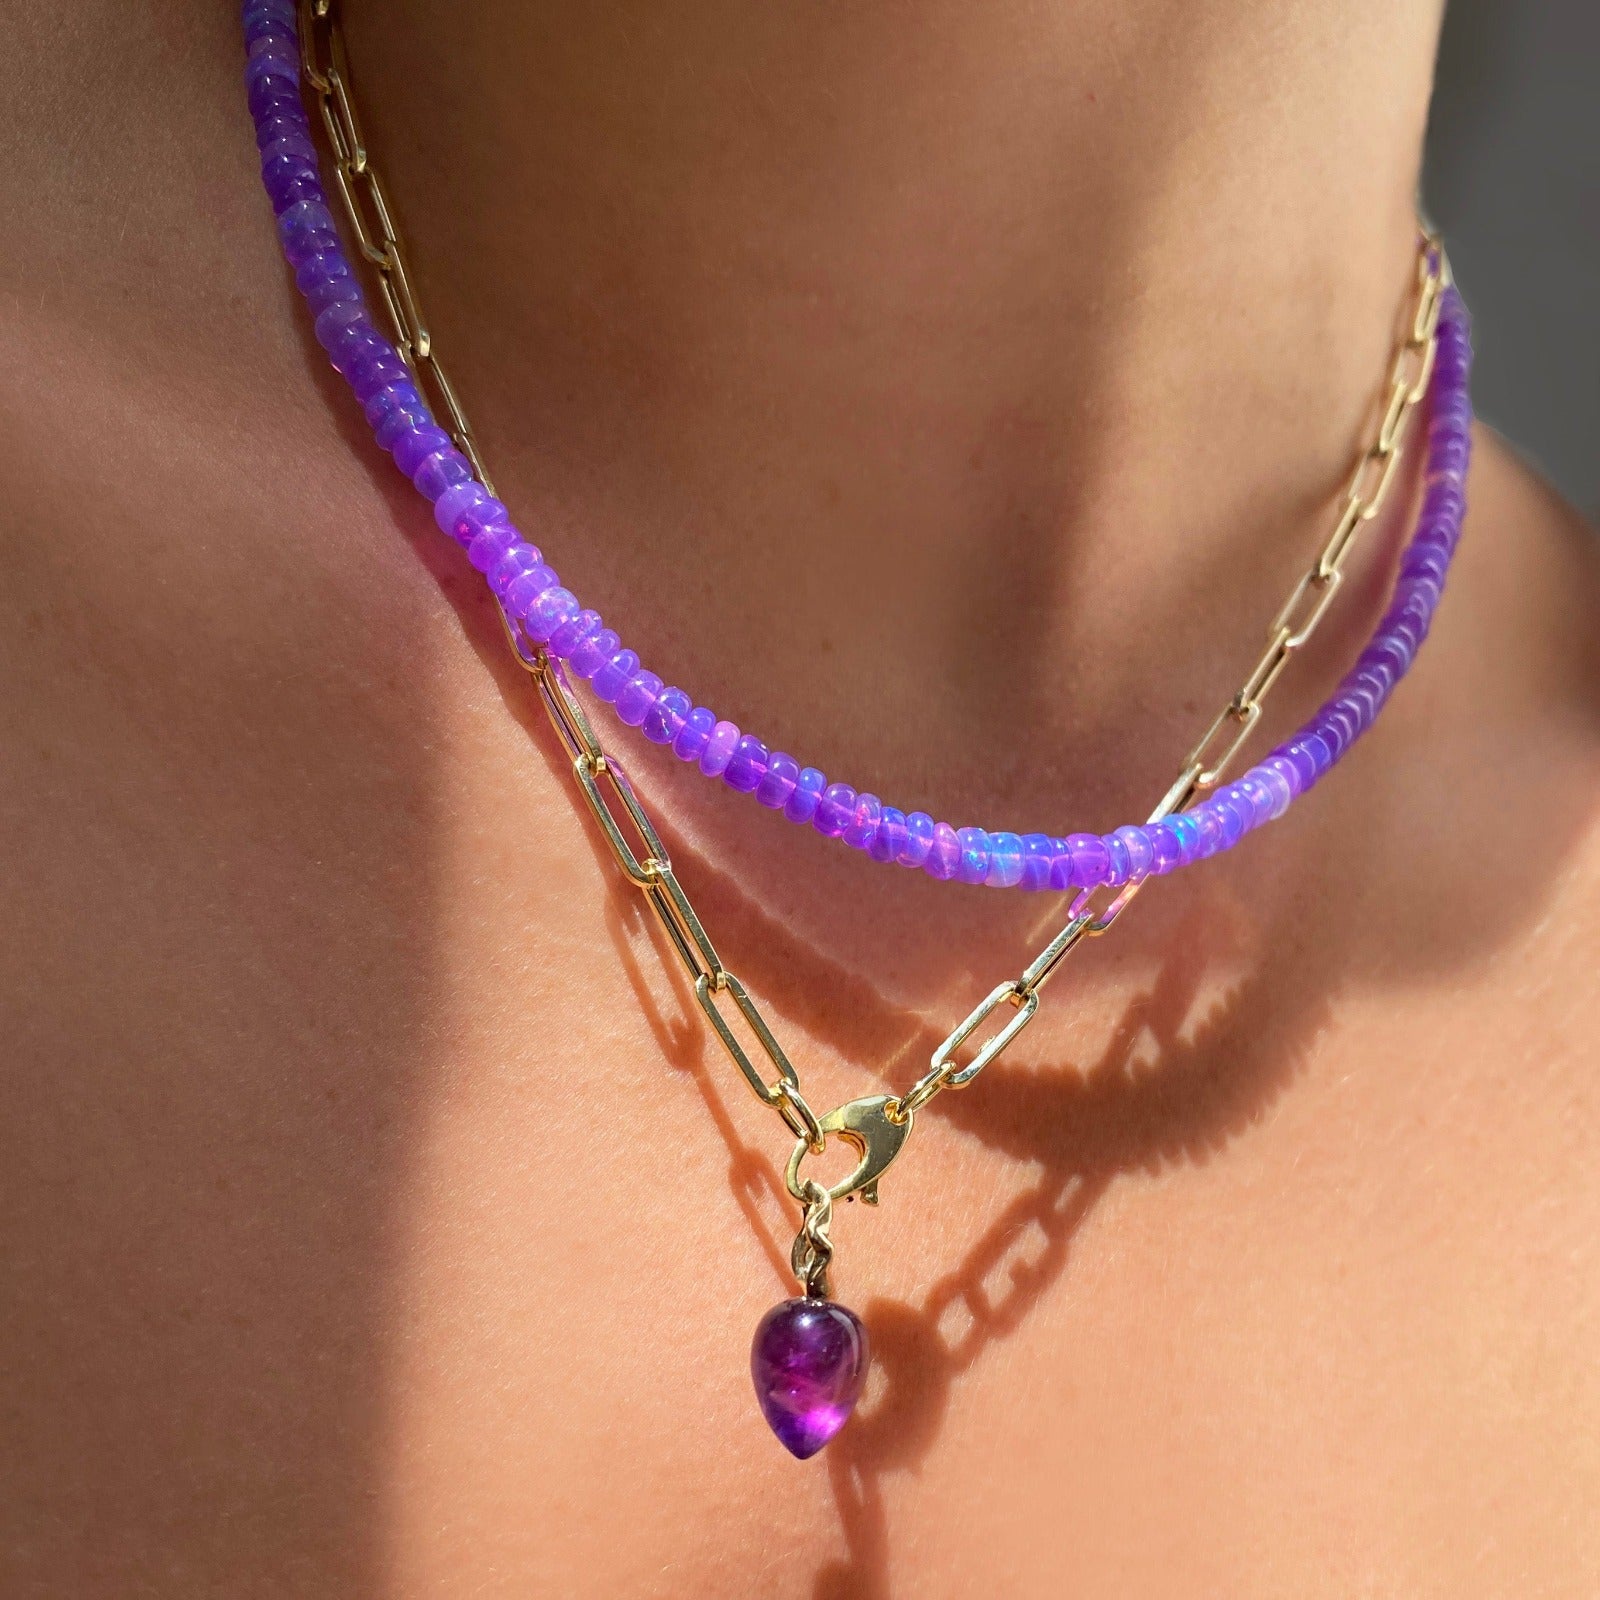 Shimmering beaded necklace made of smooth opal rondels in shades of violet on a slim gold oval clasp. Styled on a neck with with paperclip charm necklace and acorn drop charm.